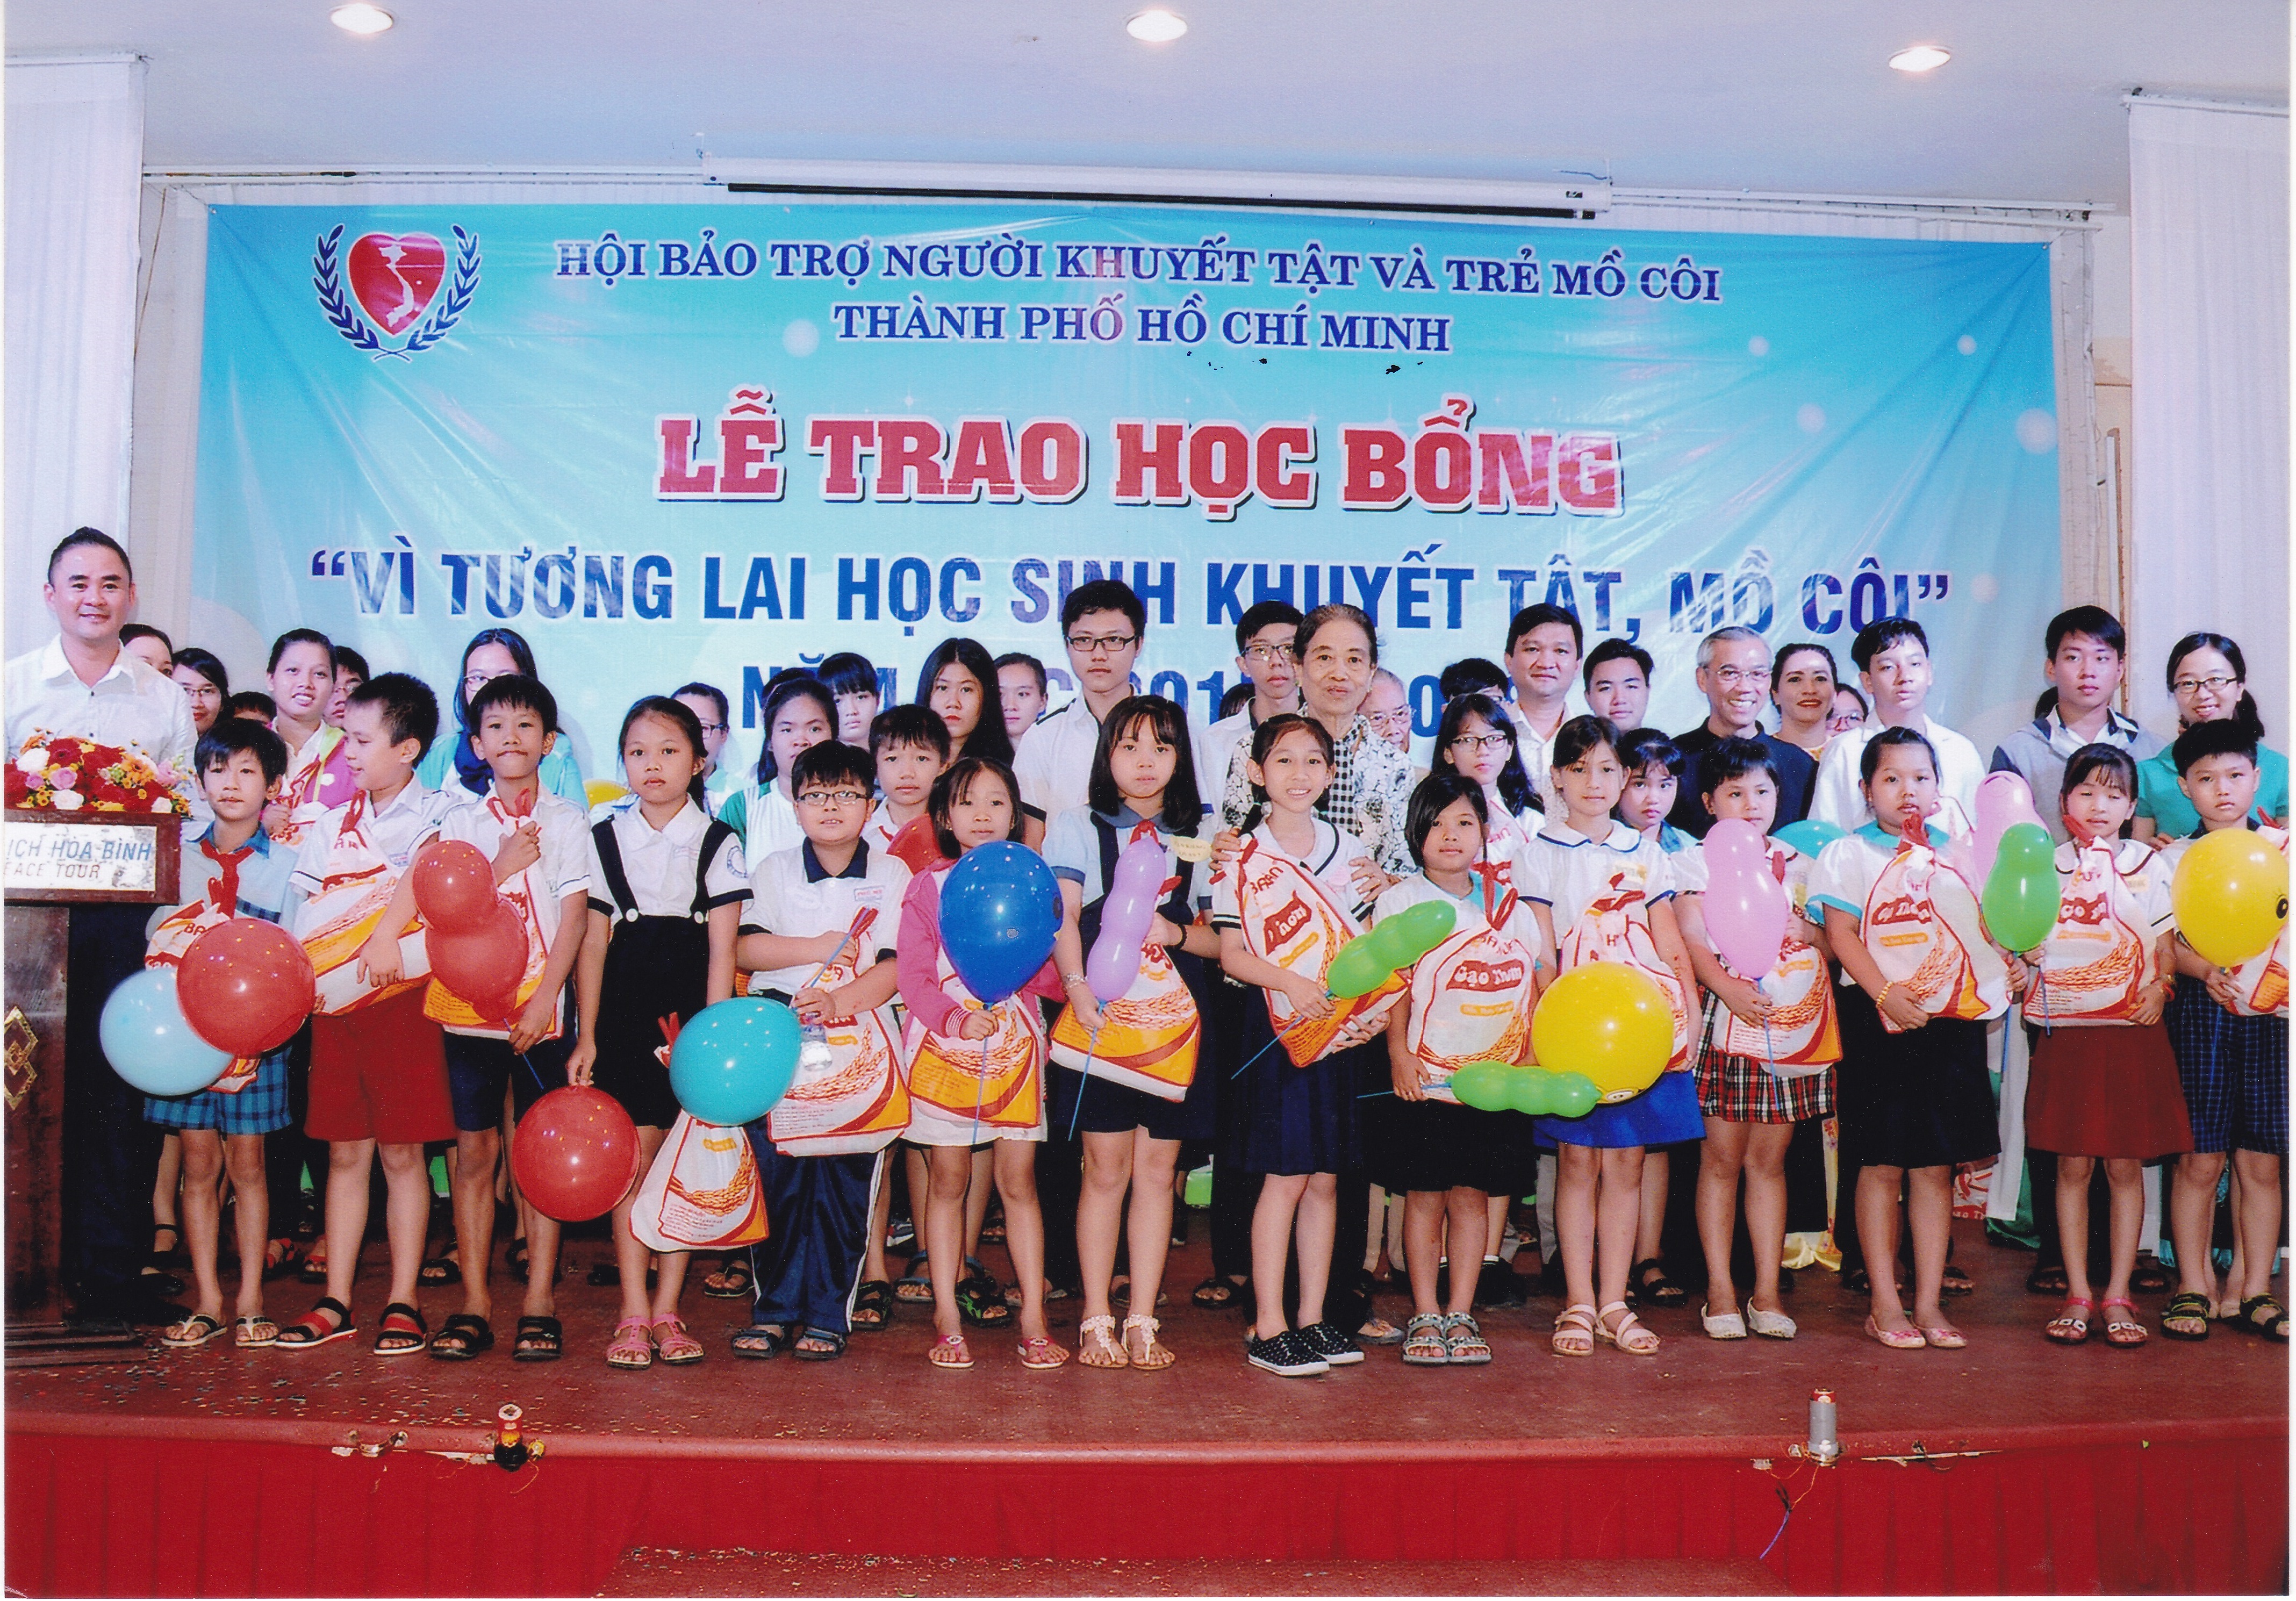 Ms. Ly Minh Truc, Deputy Secretary of Dist. 12, Ho-Chi Minh City, in represent to accept the gifts from Eden